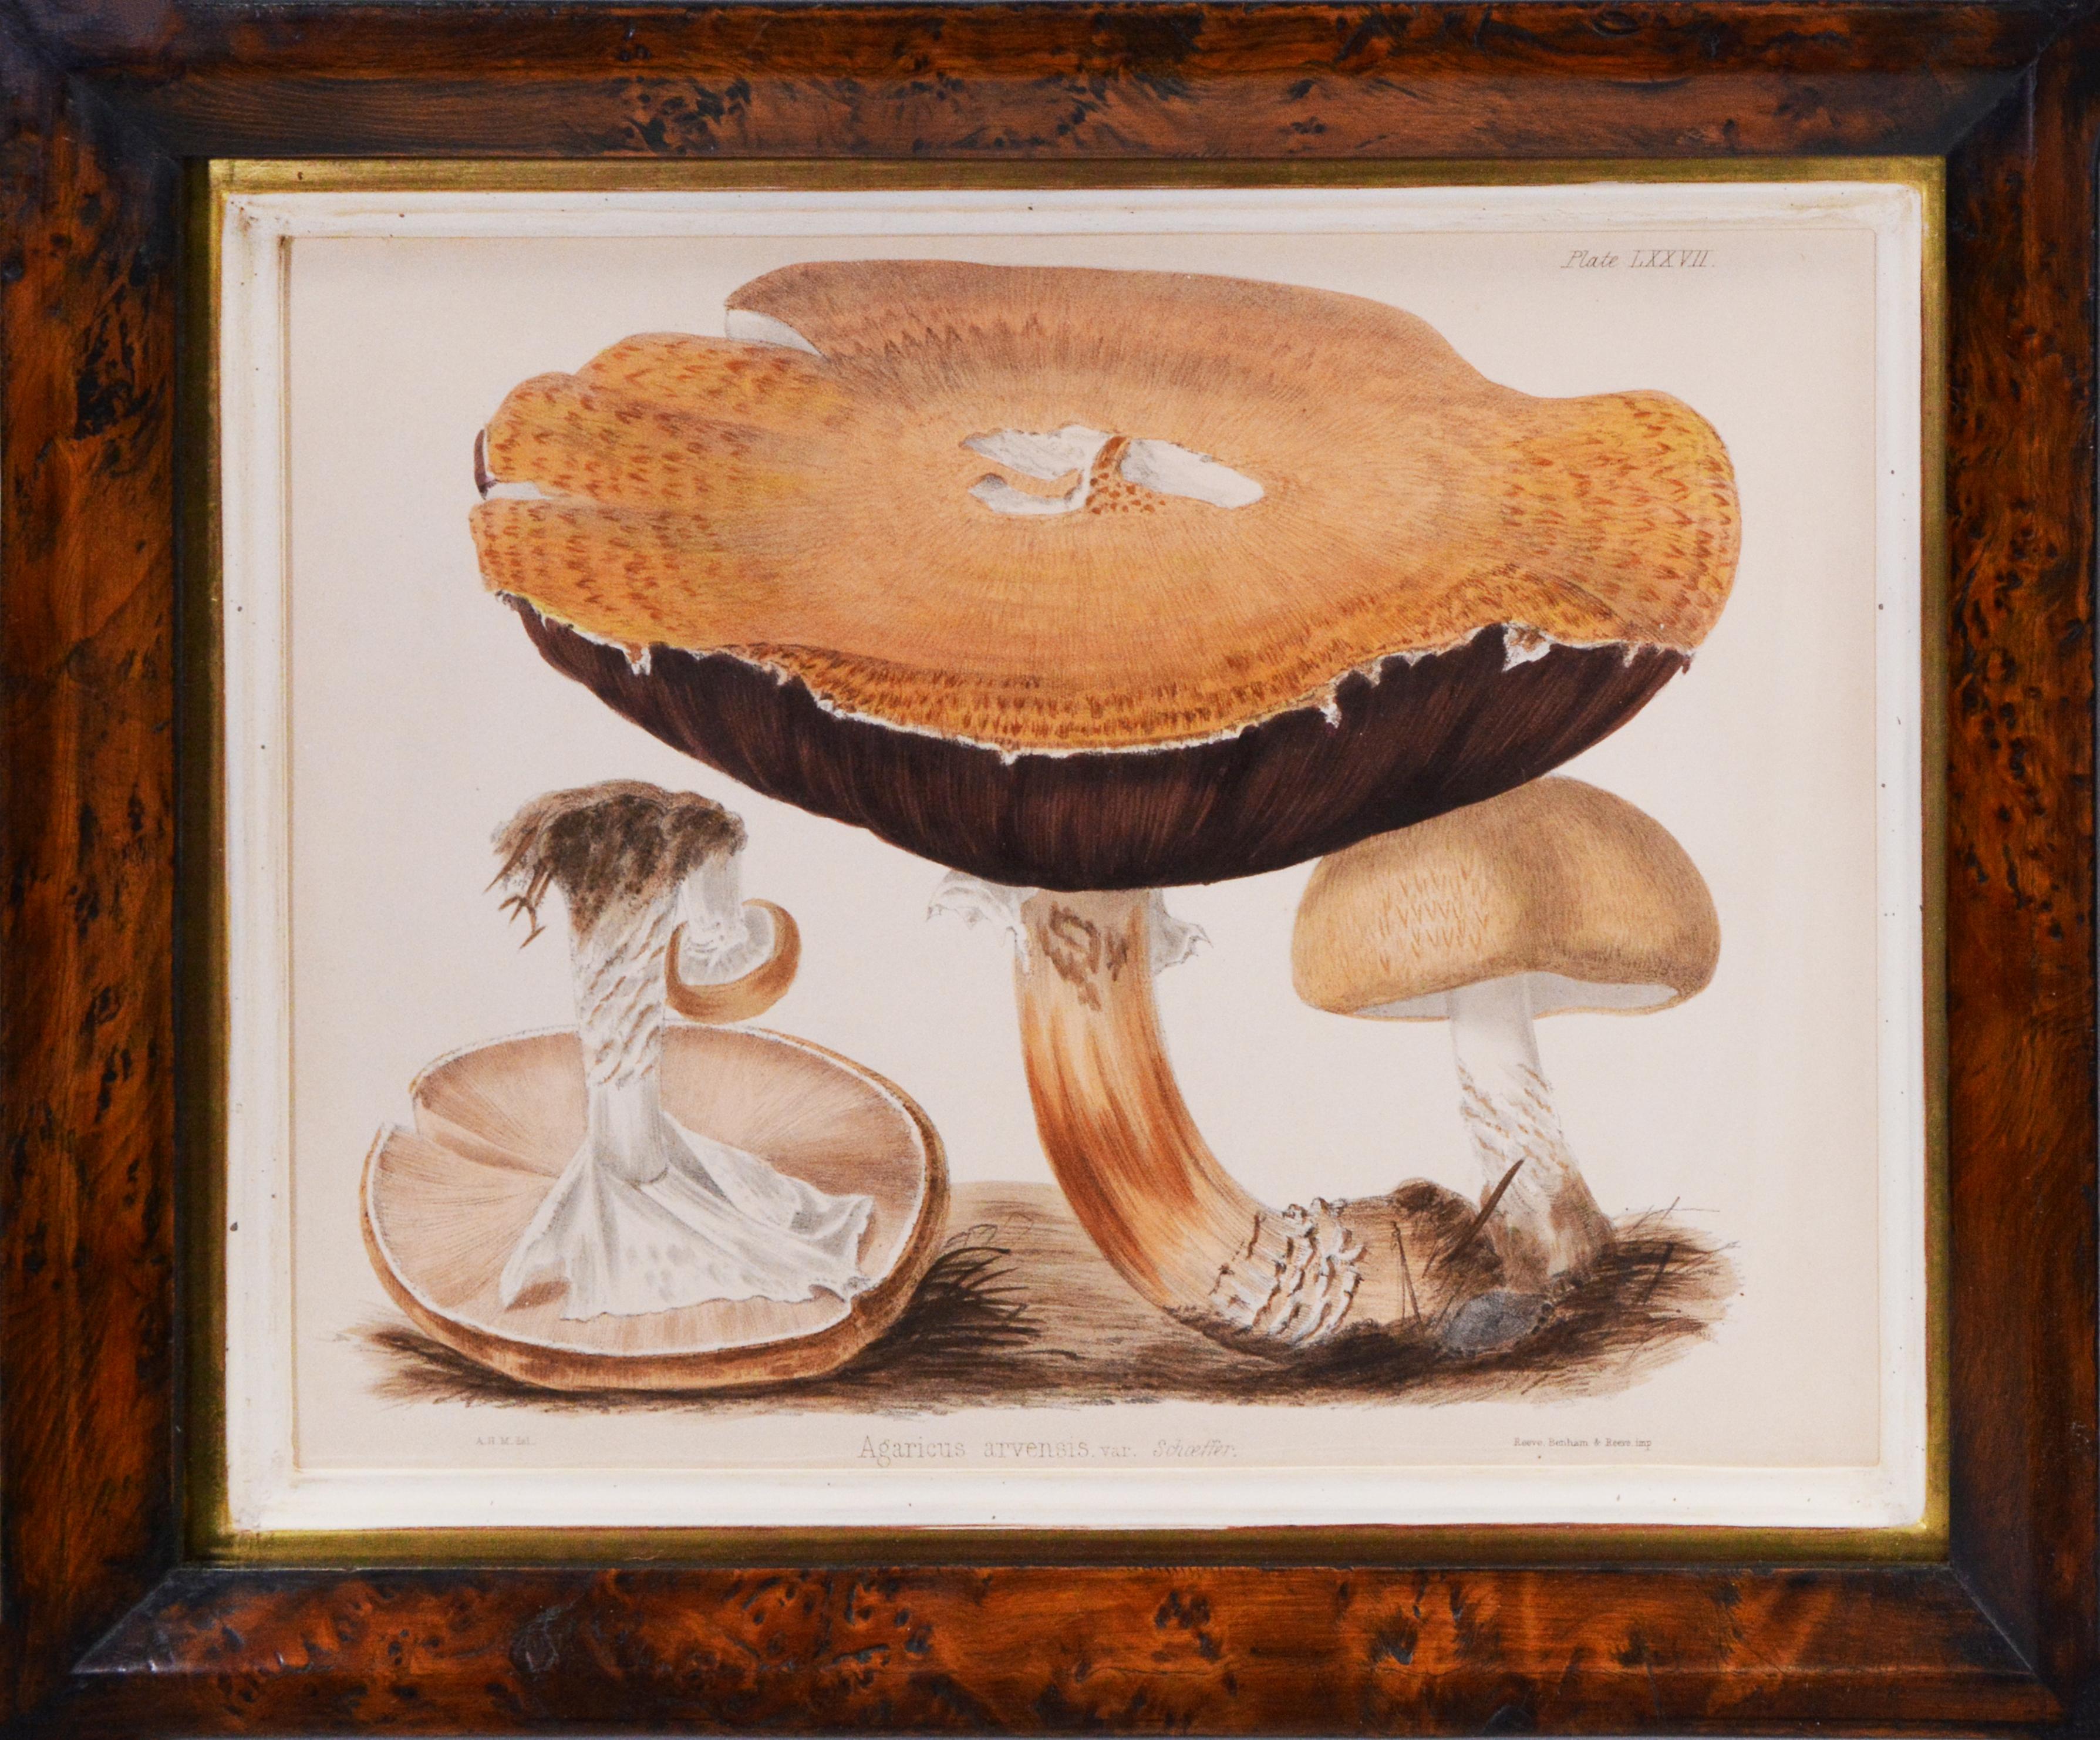 Hussey, Group of 8 Illustrations of British Mycology, Fungi and Mushrooms.  - Naturalistic Print by Unknown